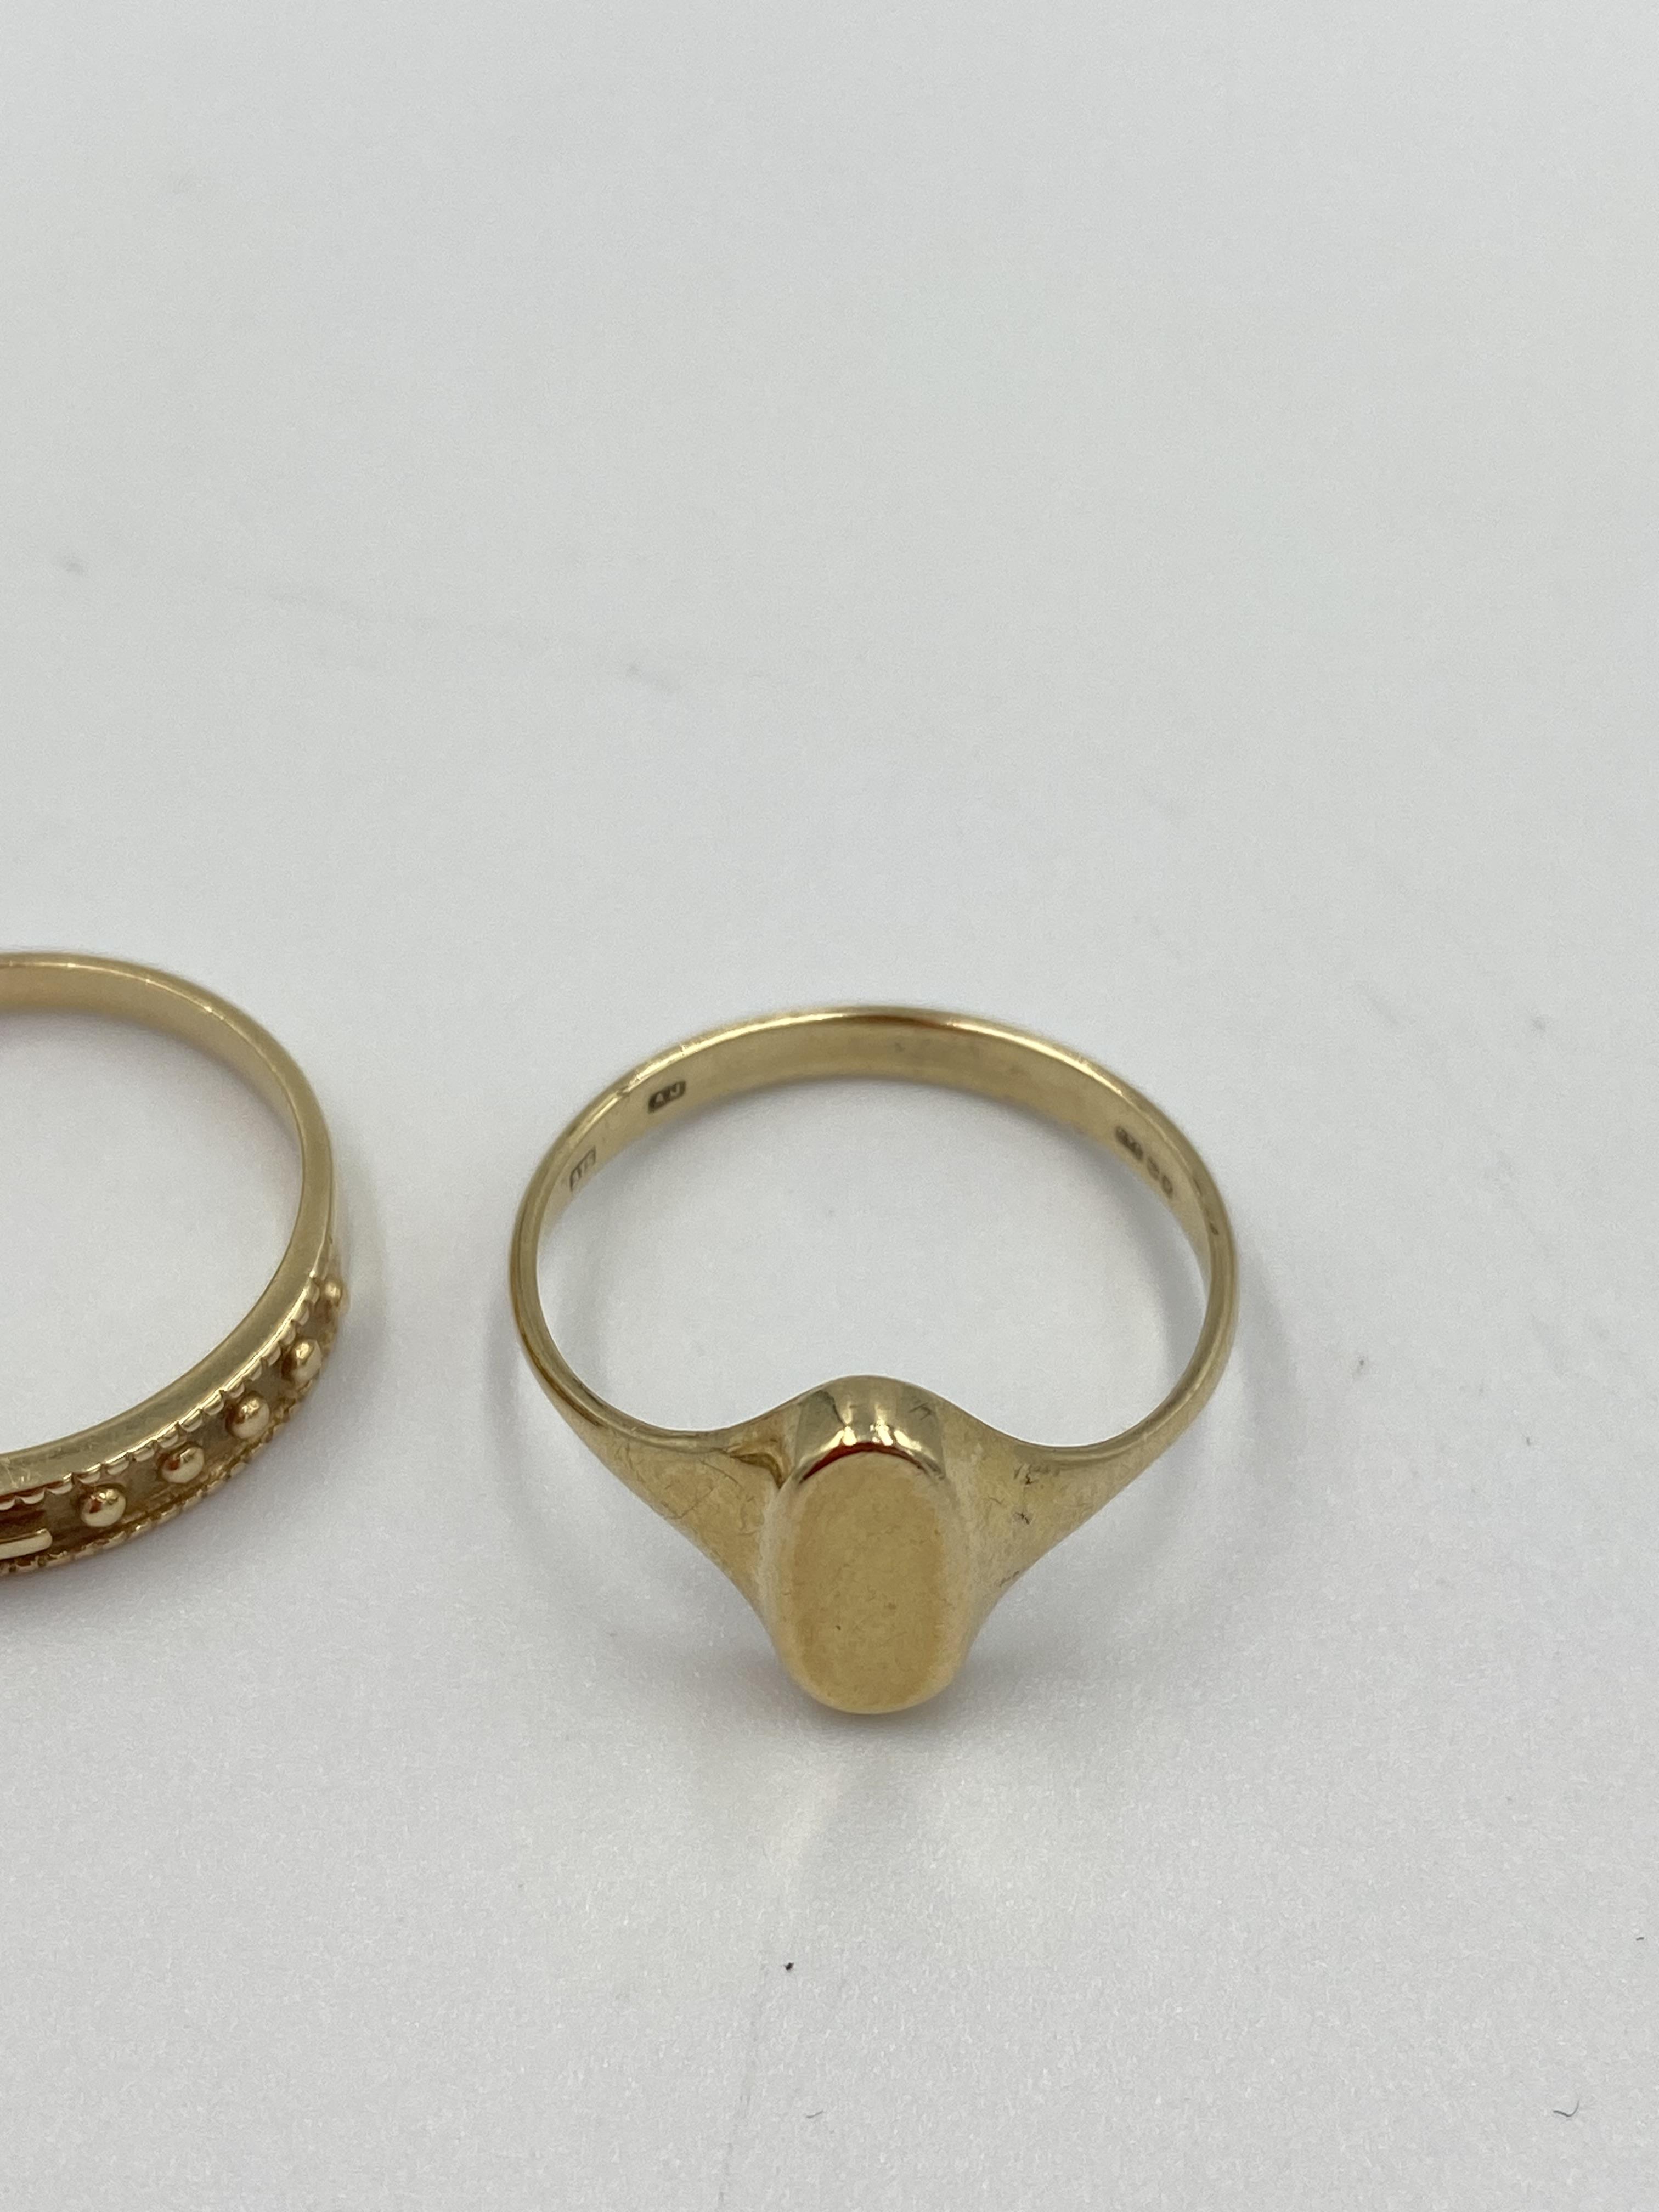 Three 9ct gold rings - Image 5 of 6